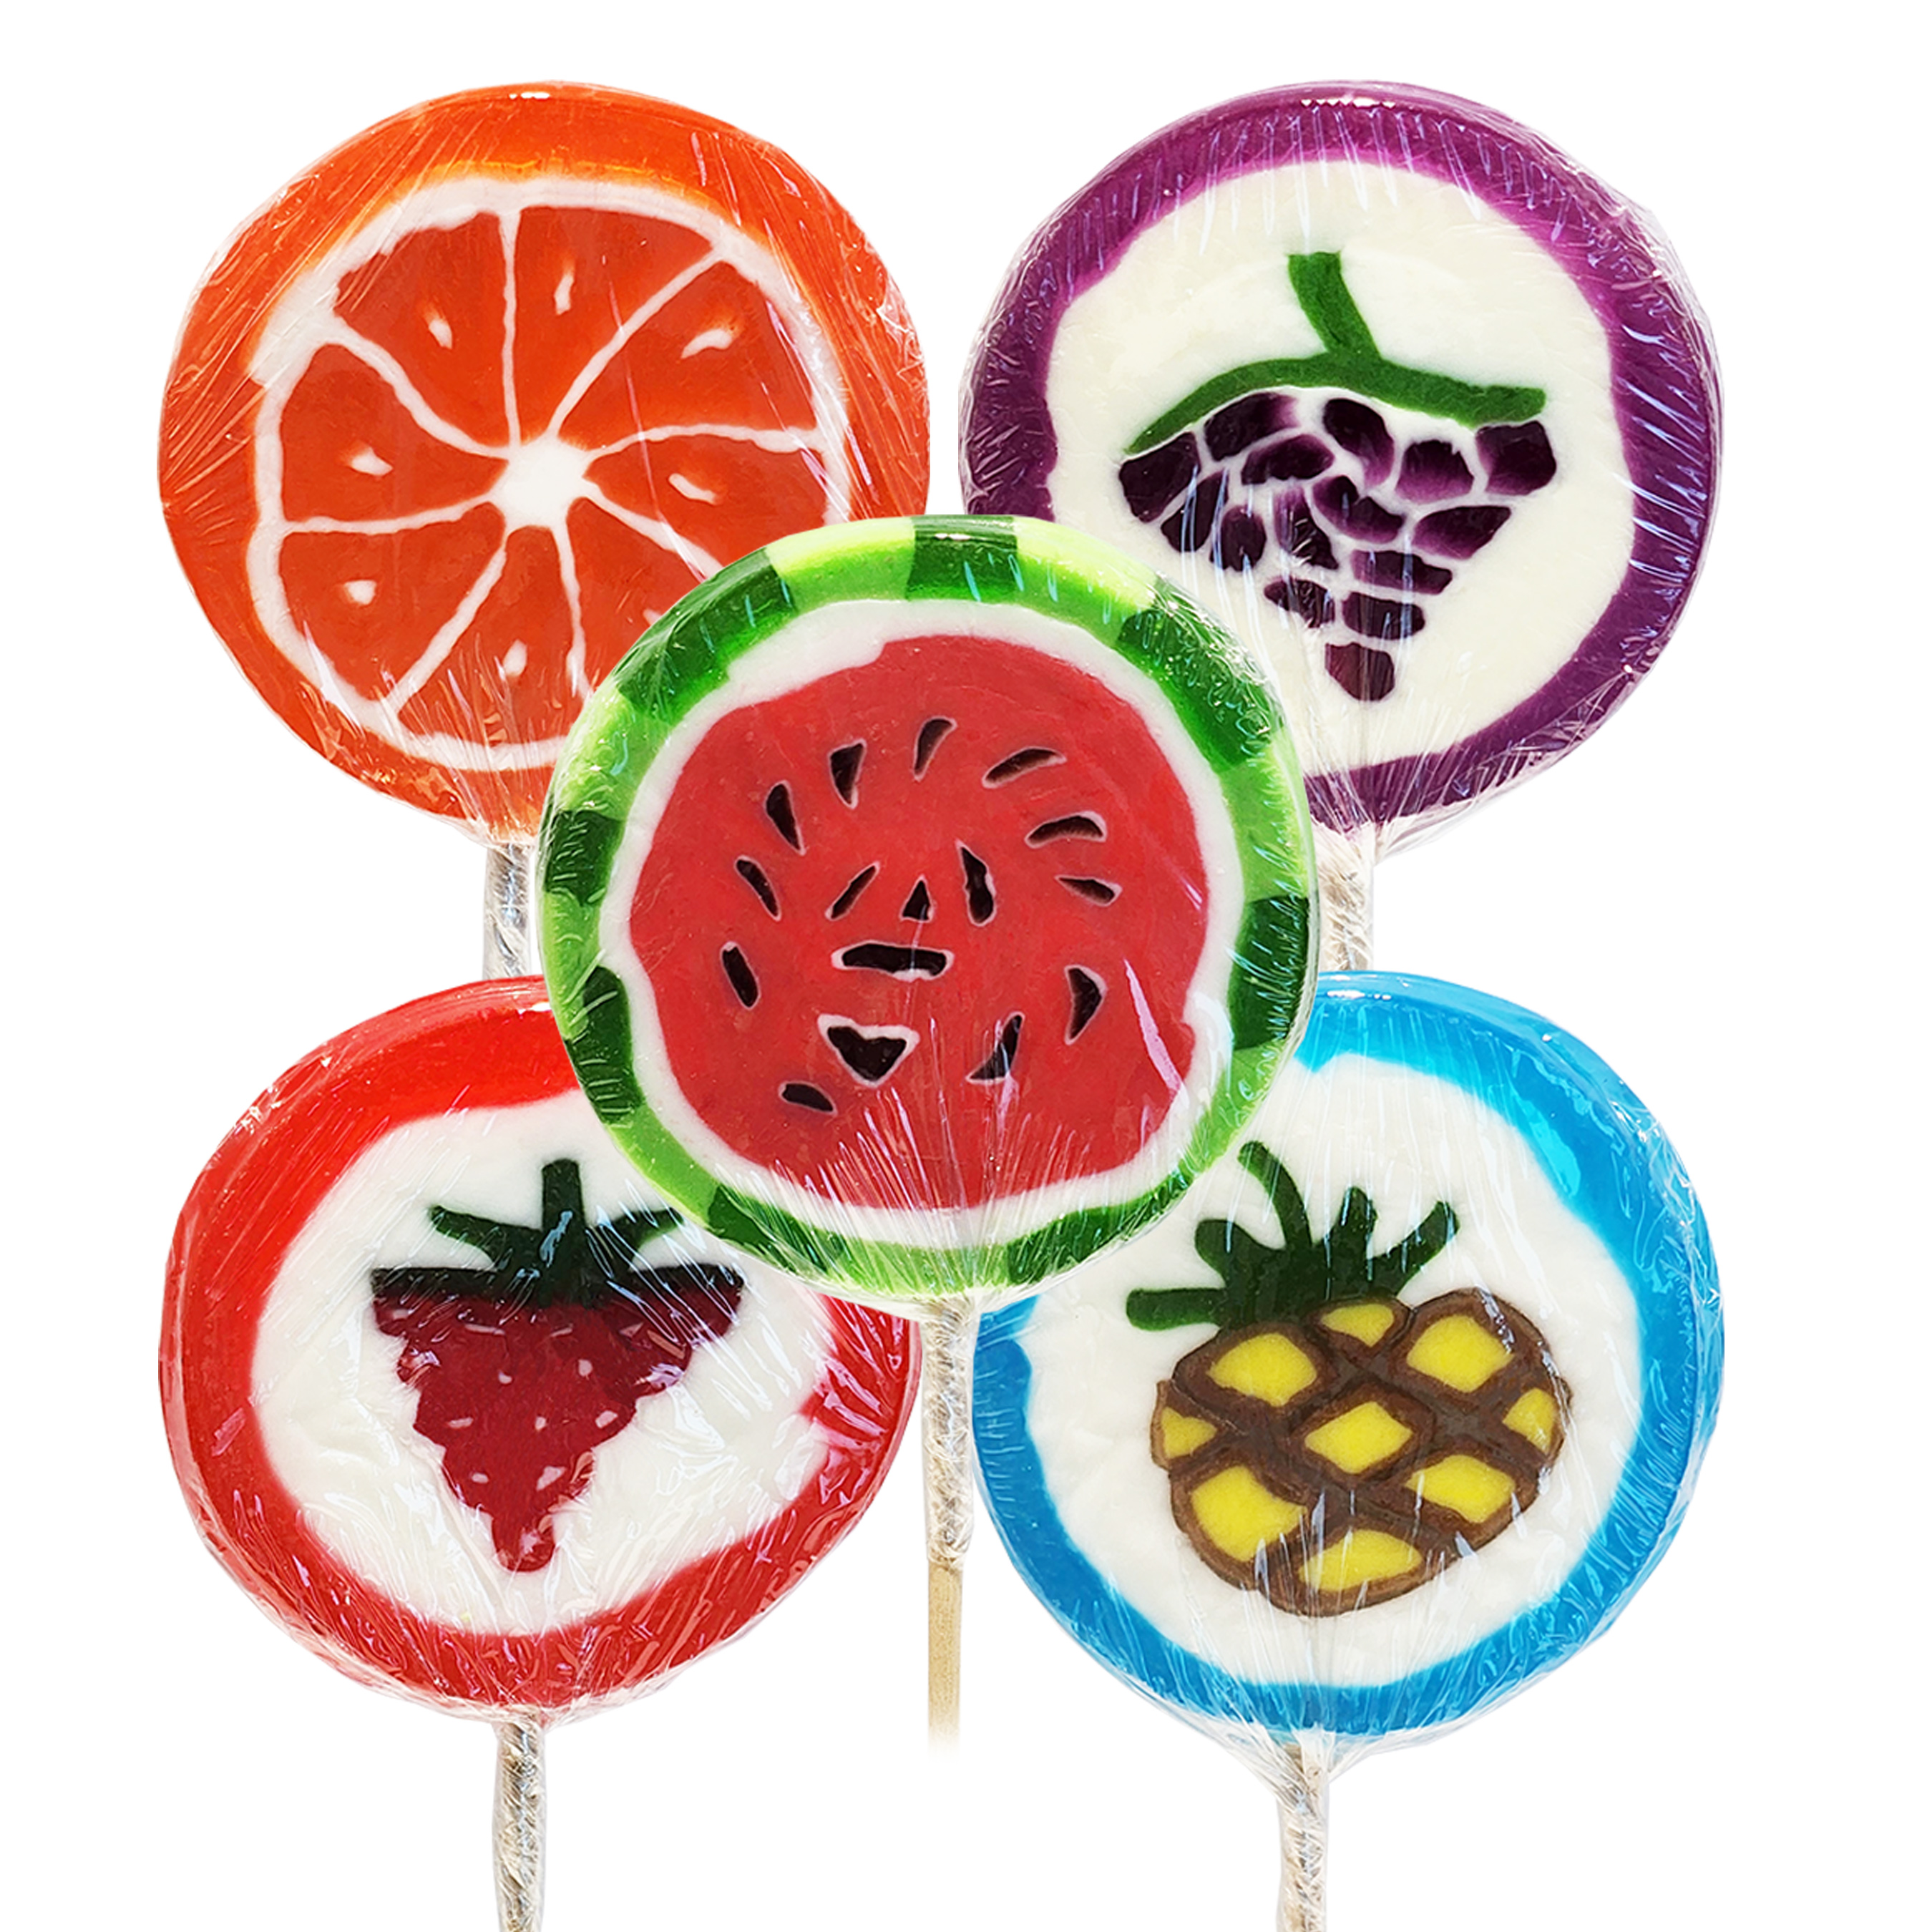 popular product includes our Jumbo fruit lollipop with five varying shapes. 90 grams. 20 pieces in a bag